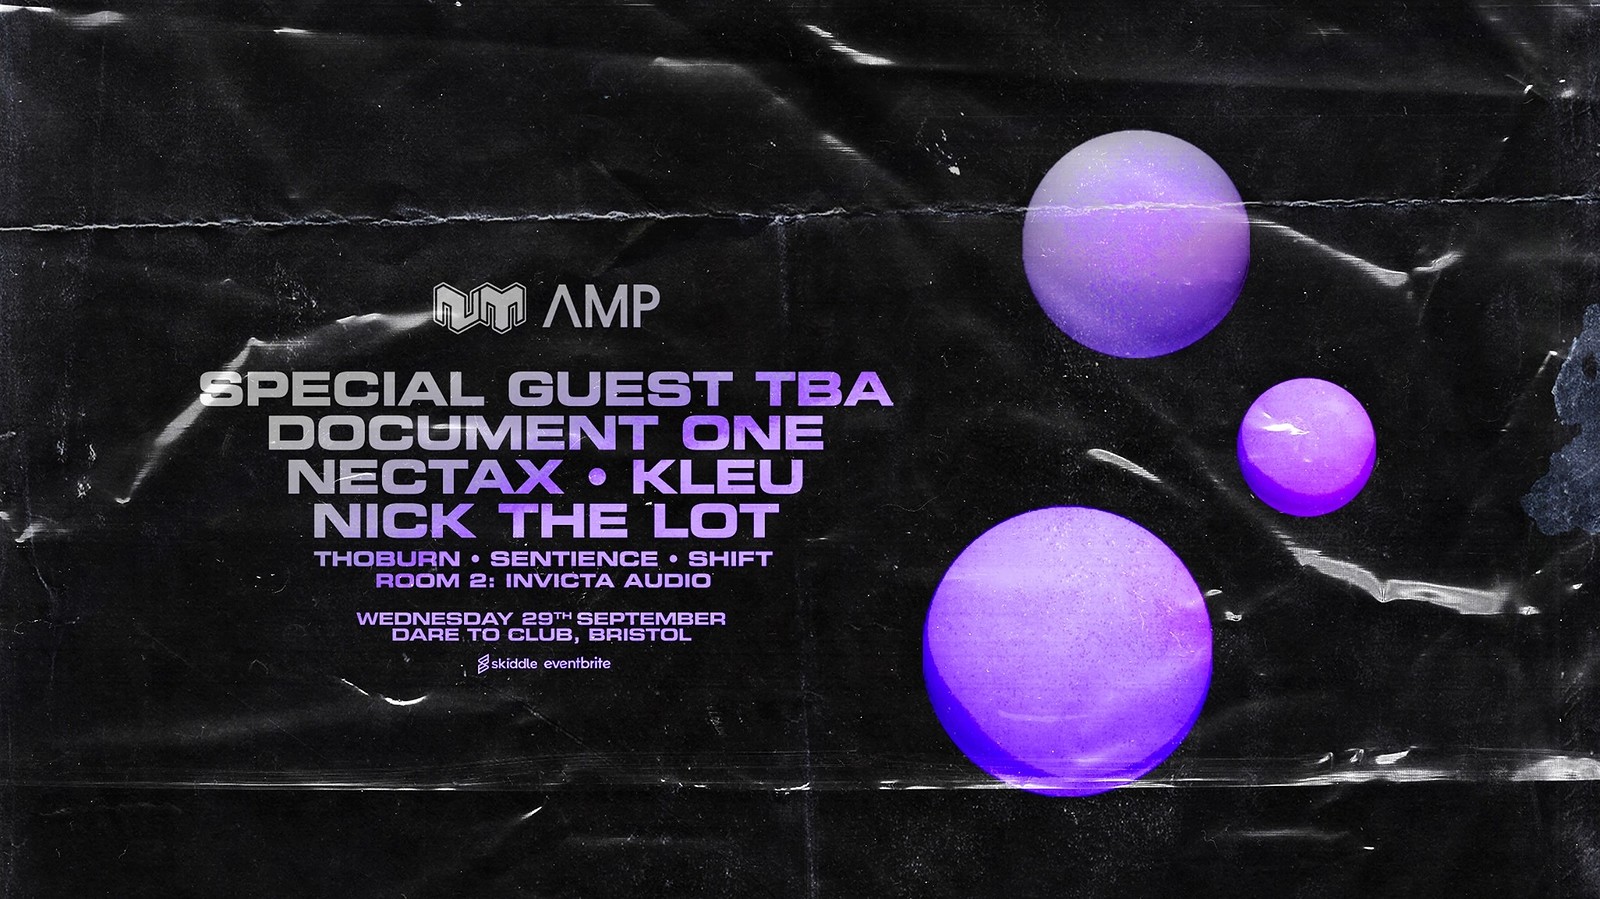 NM x AMP: The Return at Dare to Club